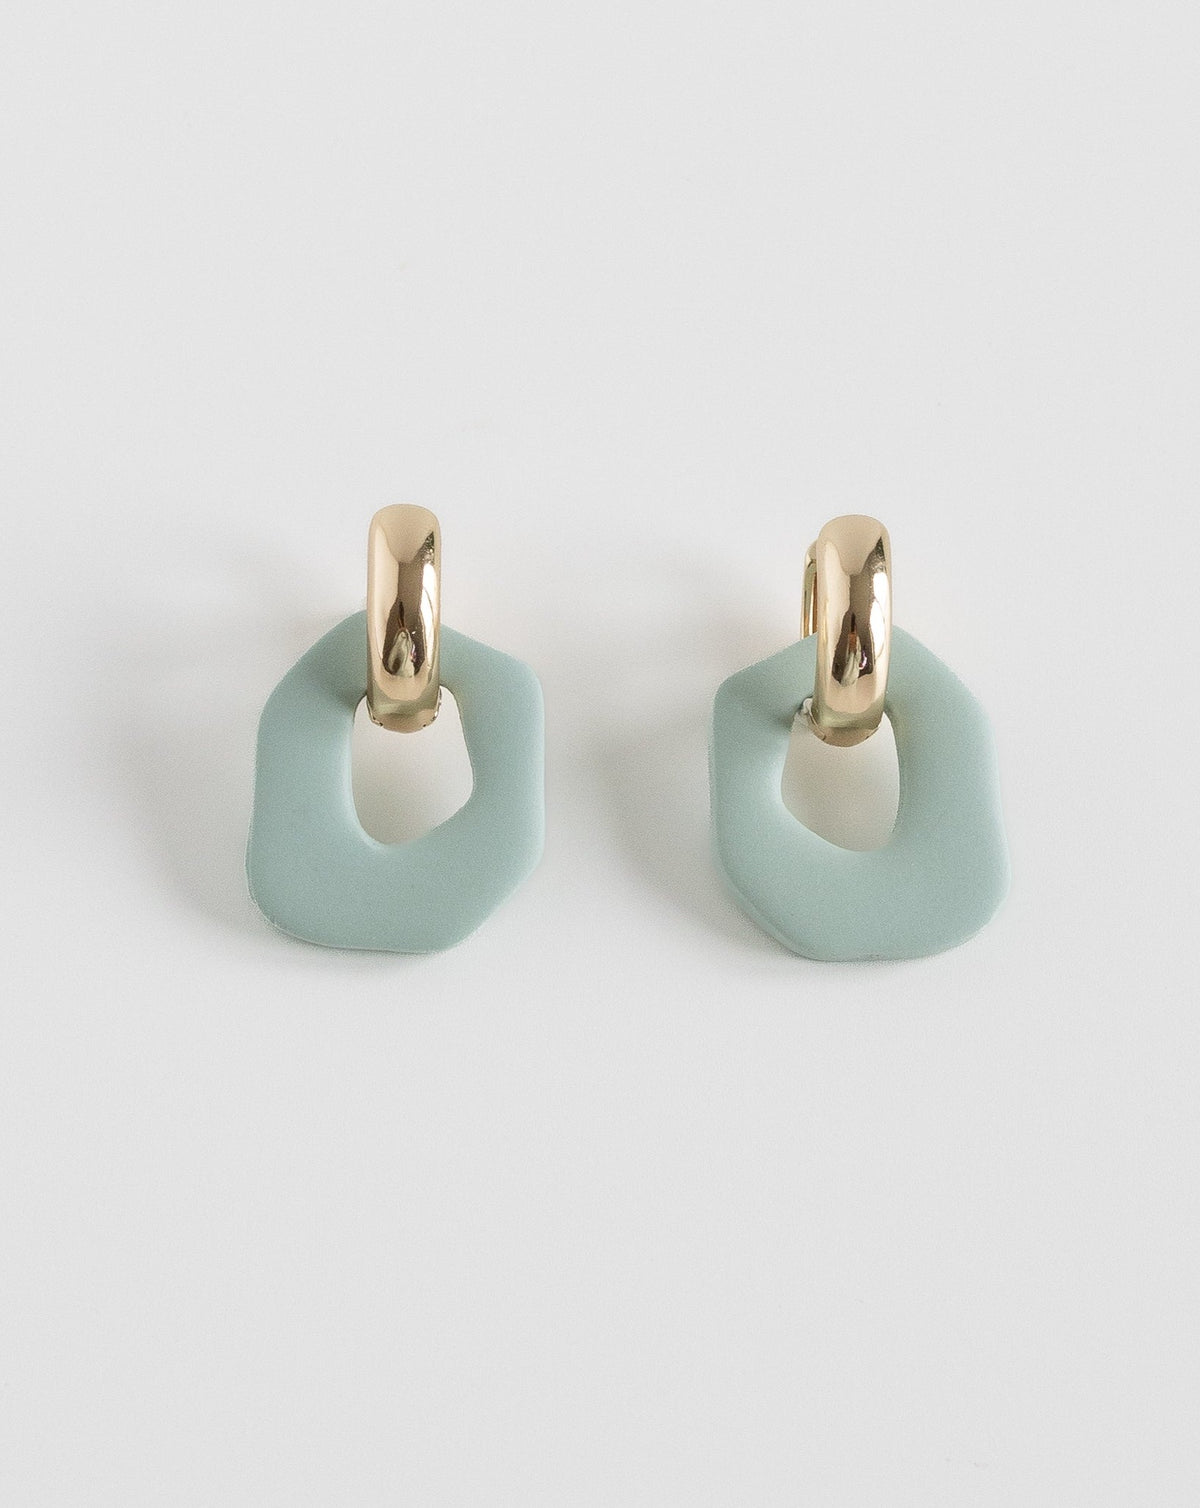 Darien earrings in Sage color with gold hoops, front view